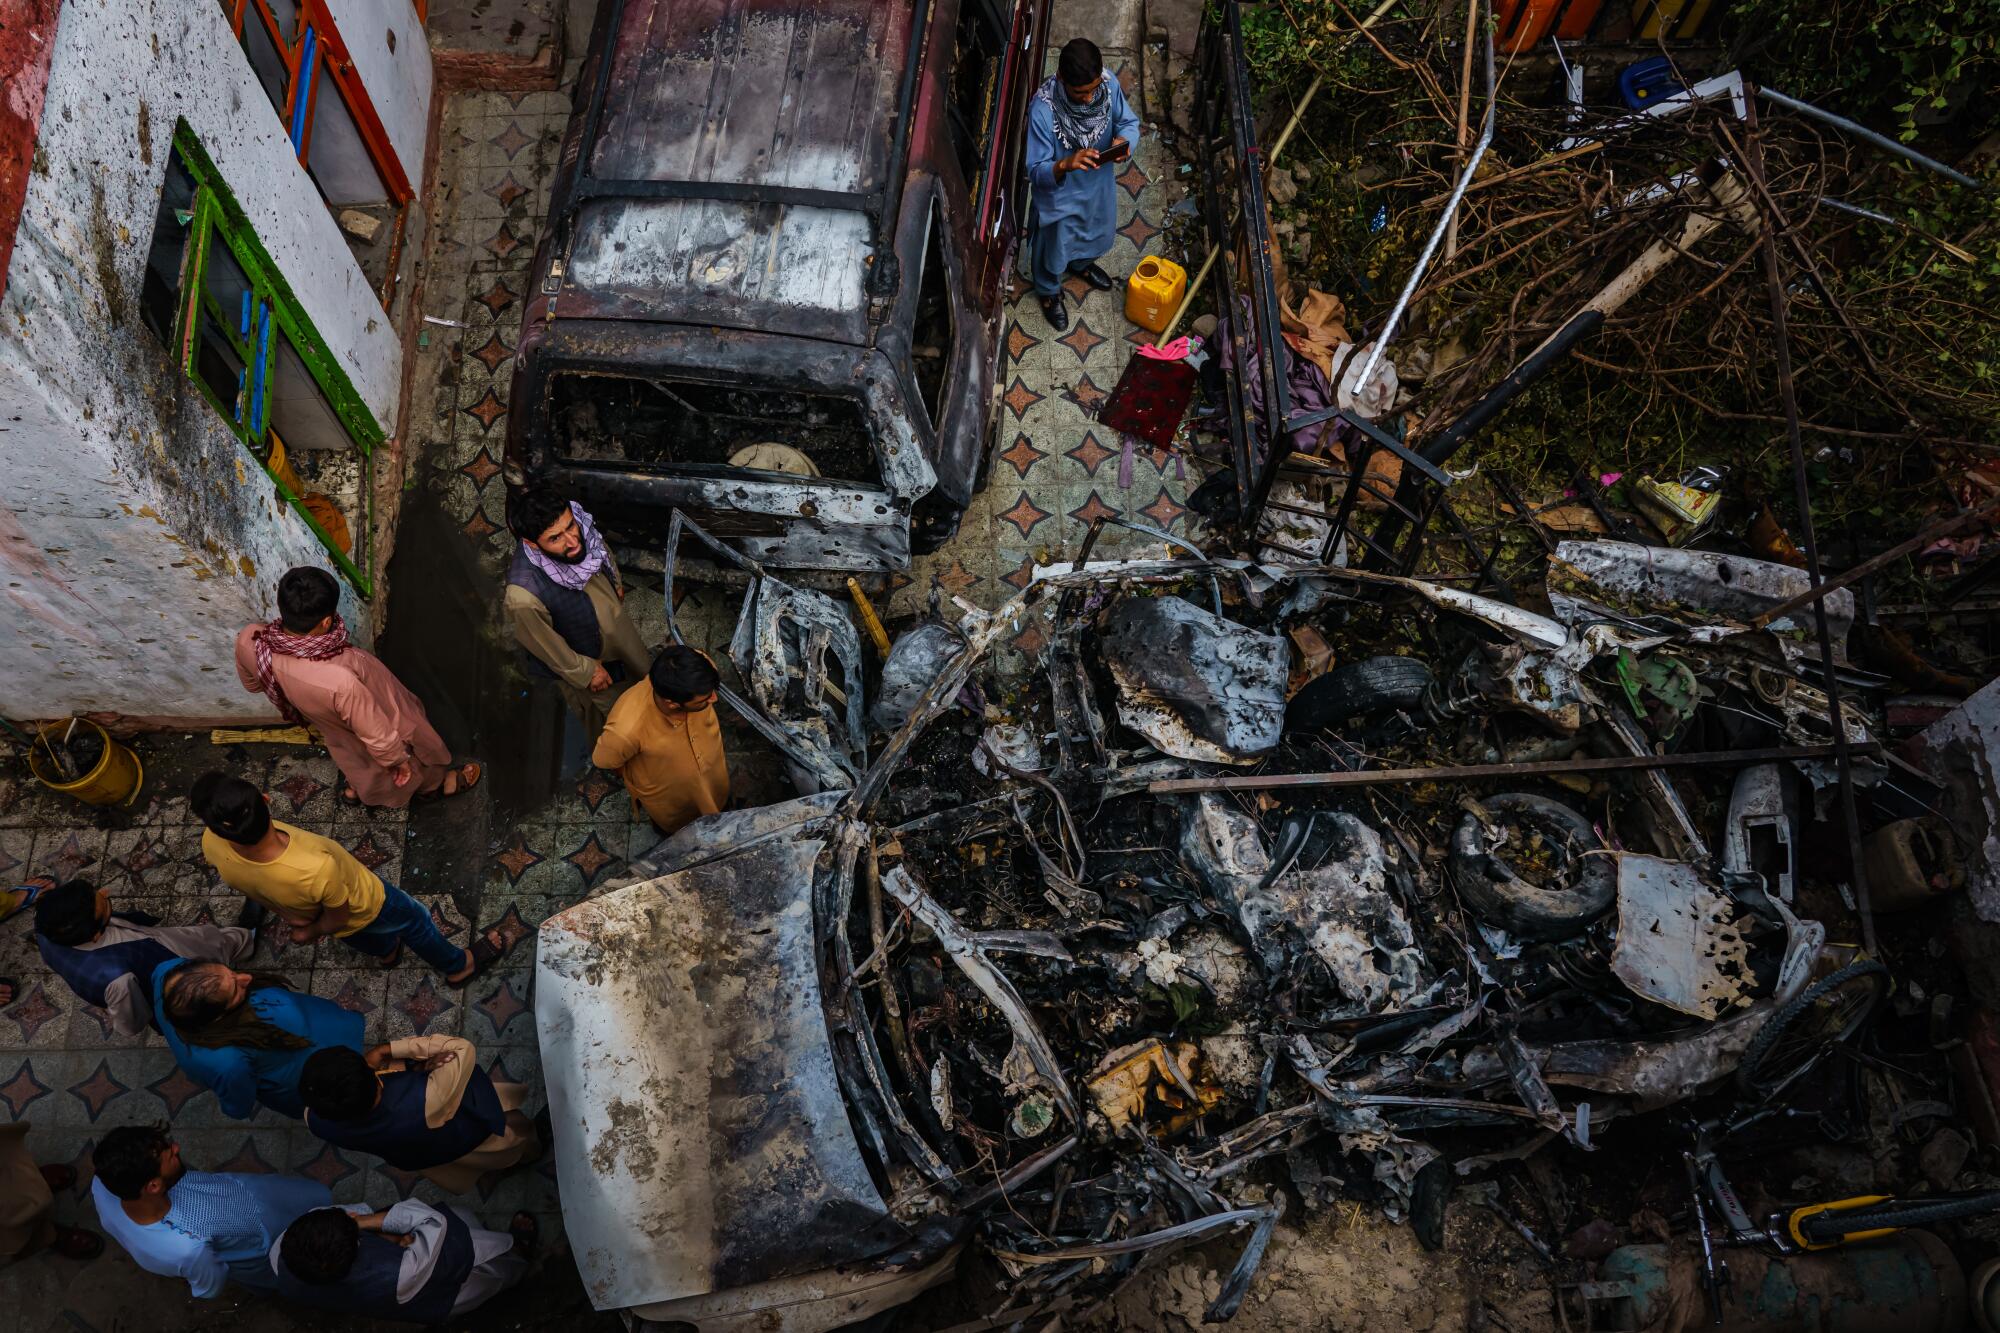 People gathering around burned-out vehicle